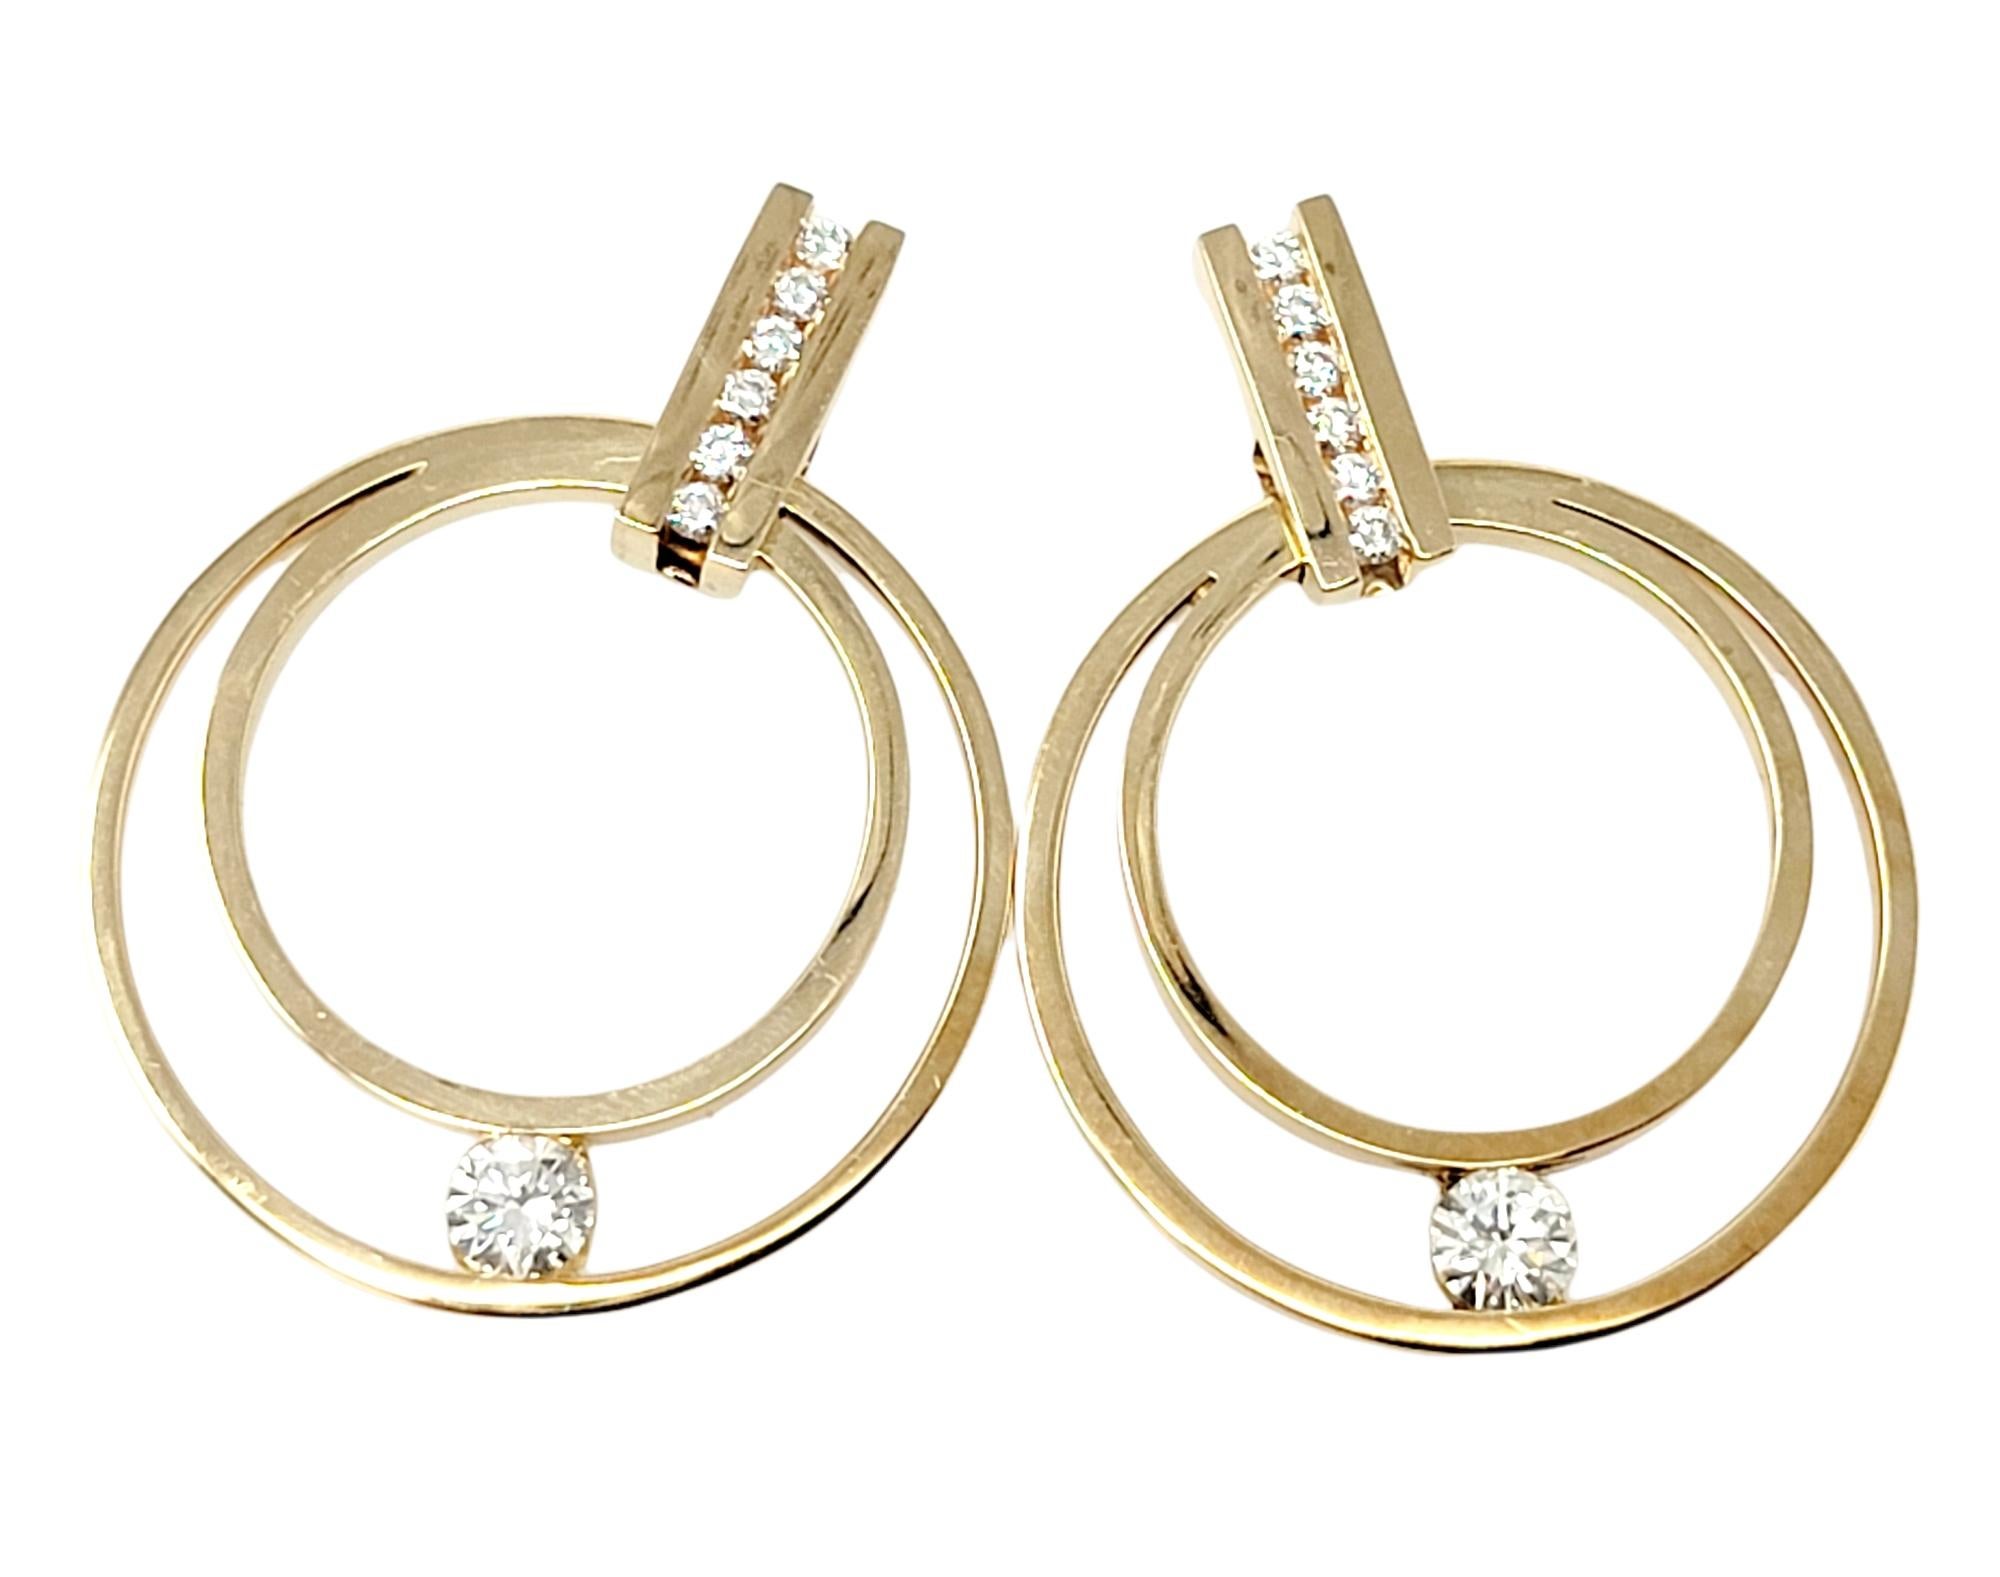 We absolutely love these gorgeous modernized hoop earrings with exquisite diamond detailing by jewelry designer Gauthier. The top portion features a vertical bar link with channel set round diamonds, while the dangling double hooped bottom features